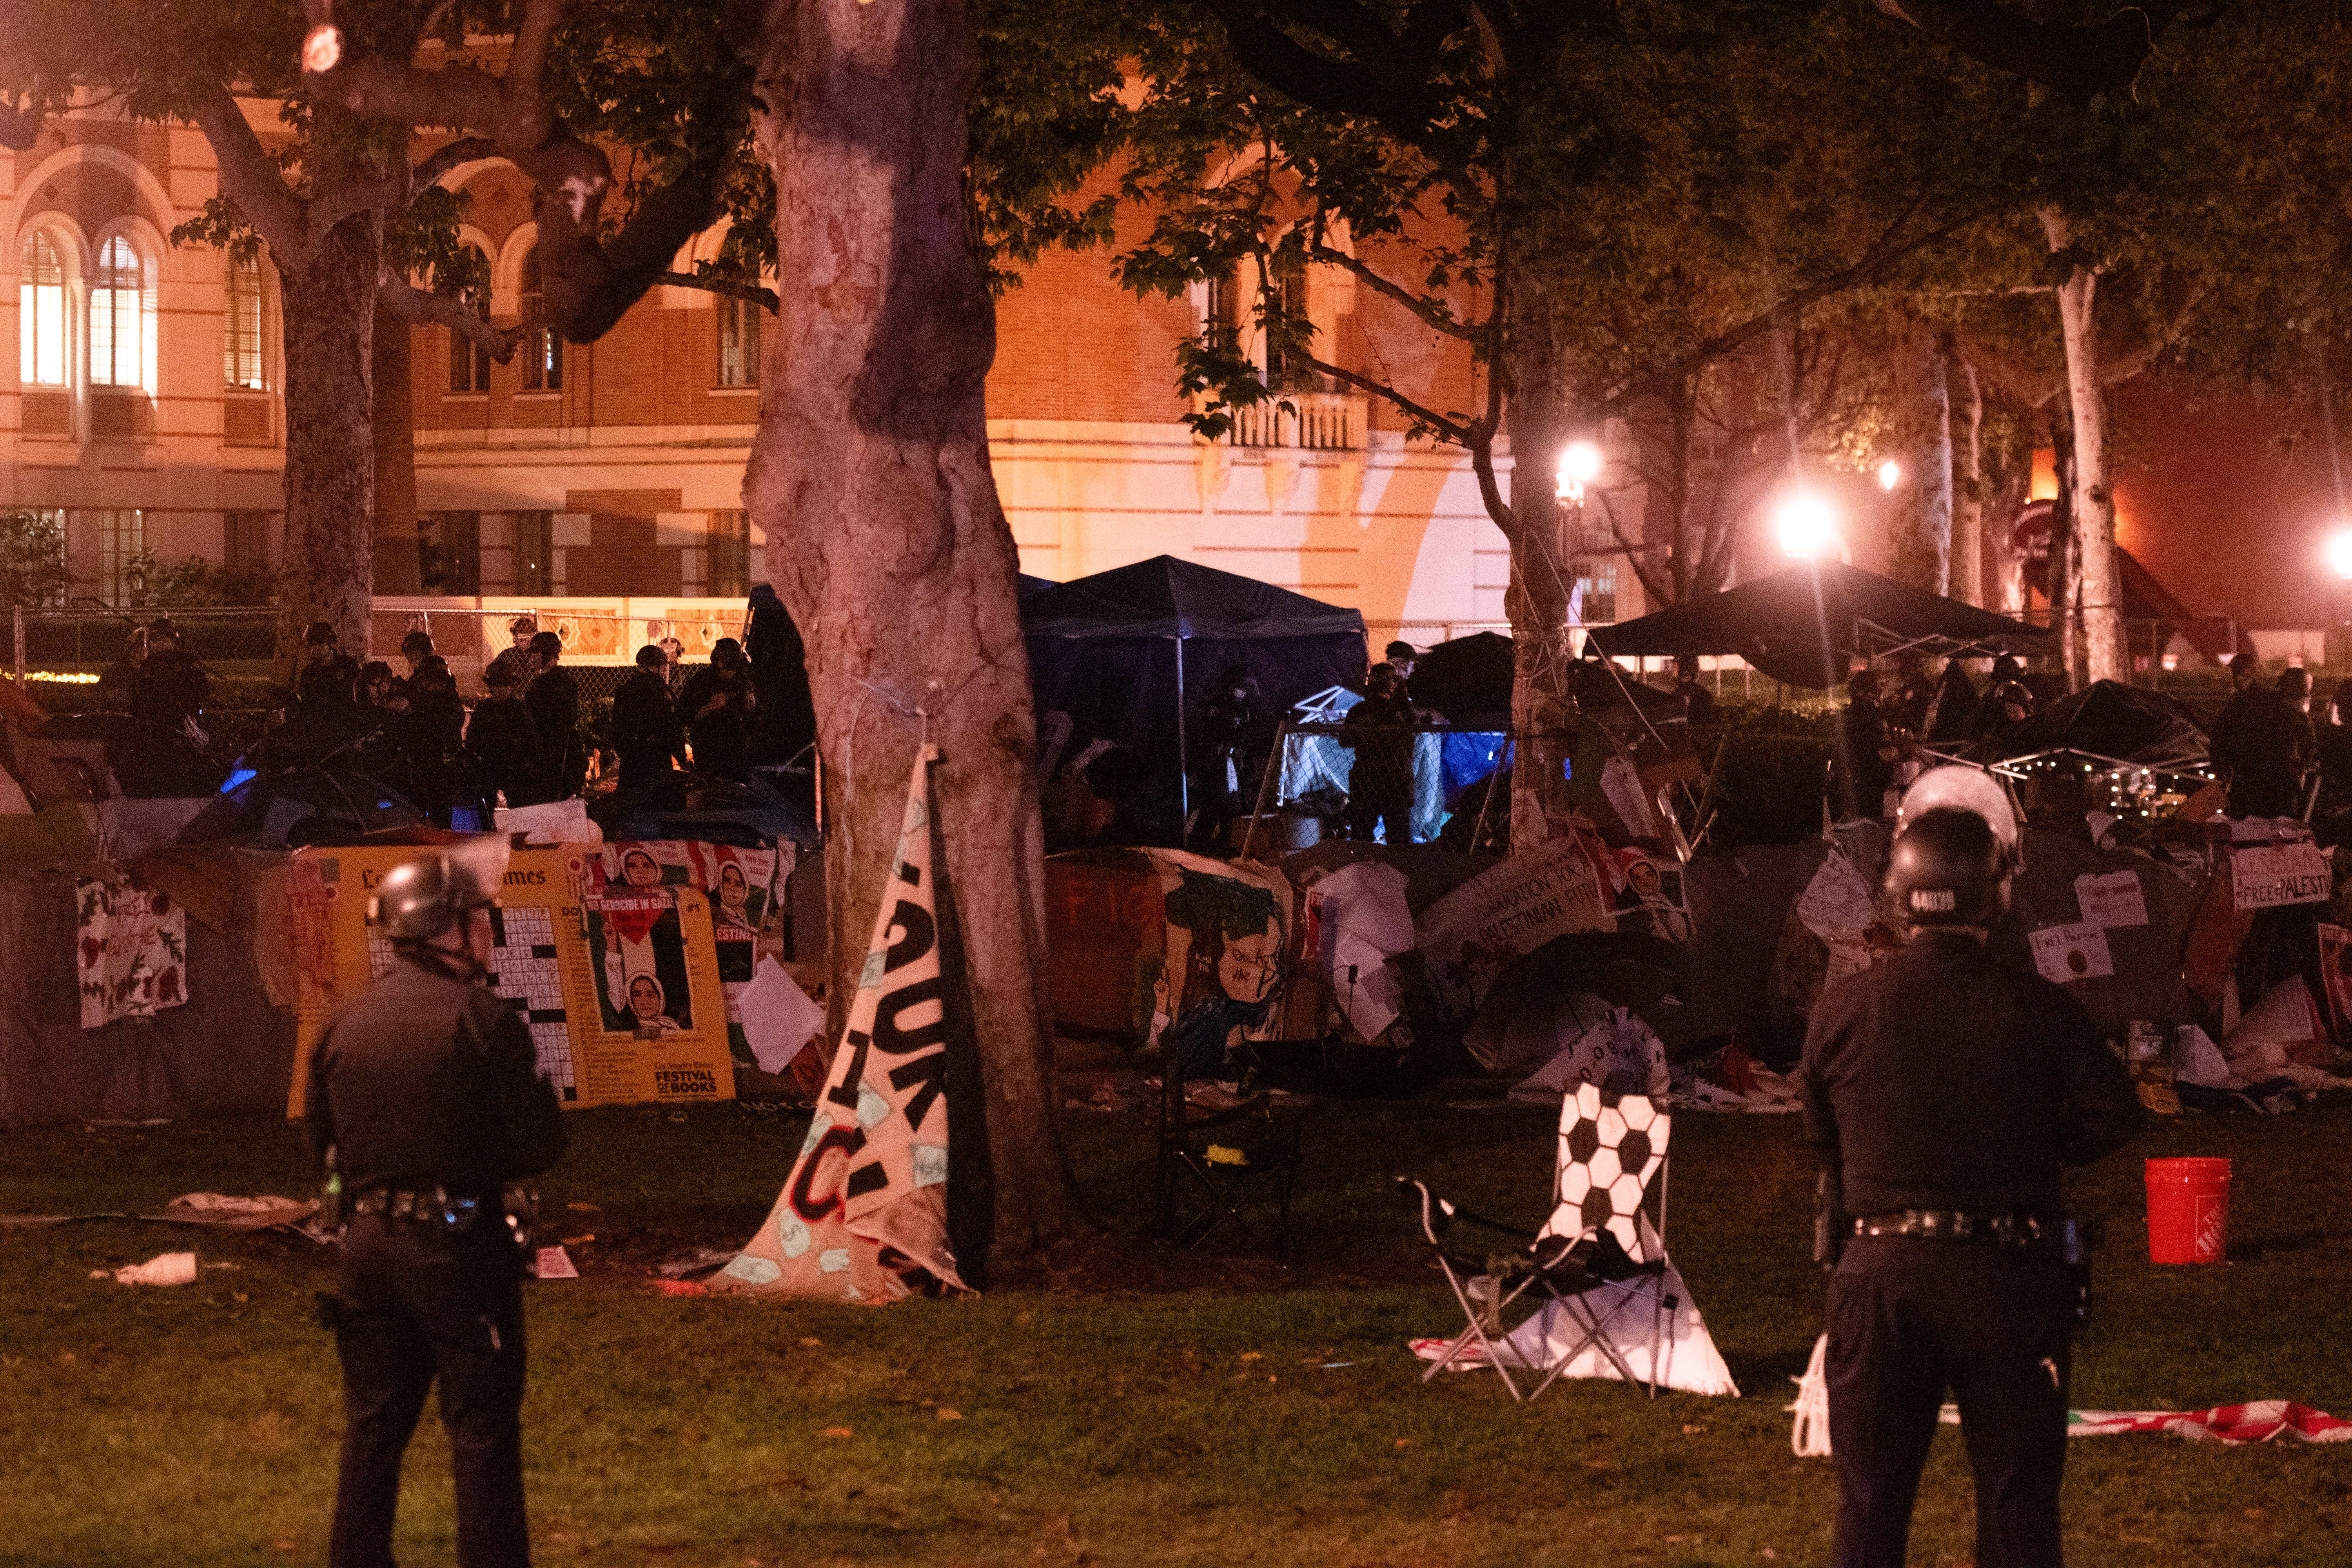 Police dismantle the pro-Palestinian encampment on Alumni Park at the University of Southern California in Los Angeles on May 5.